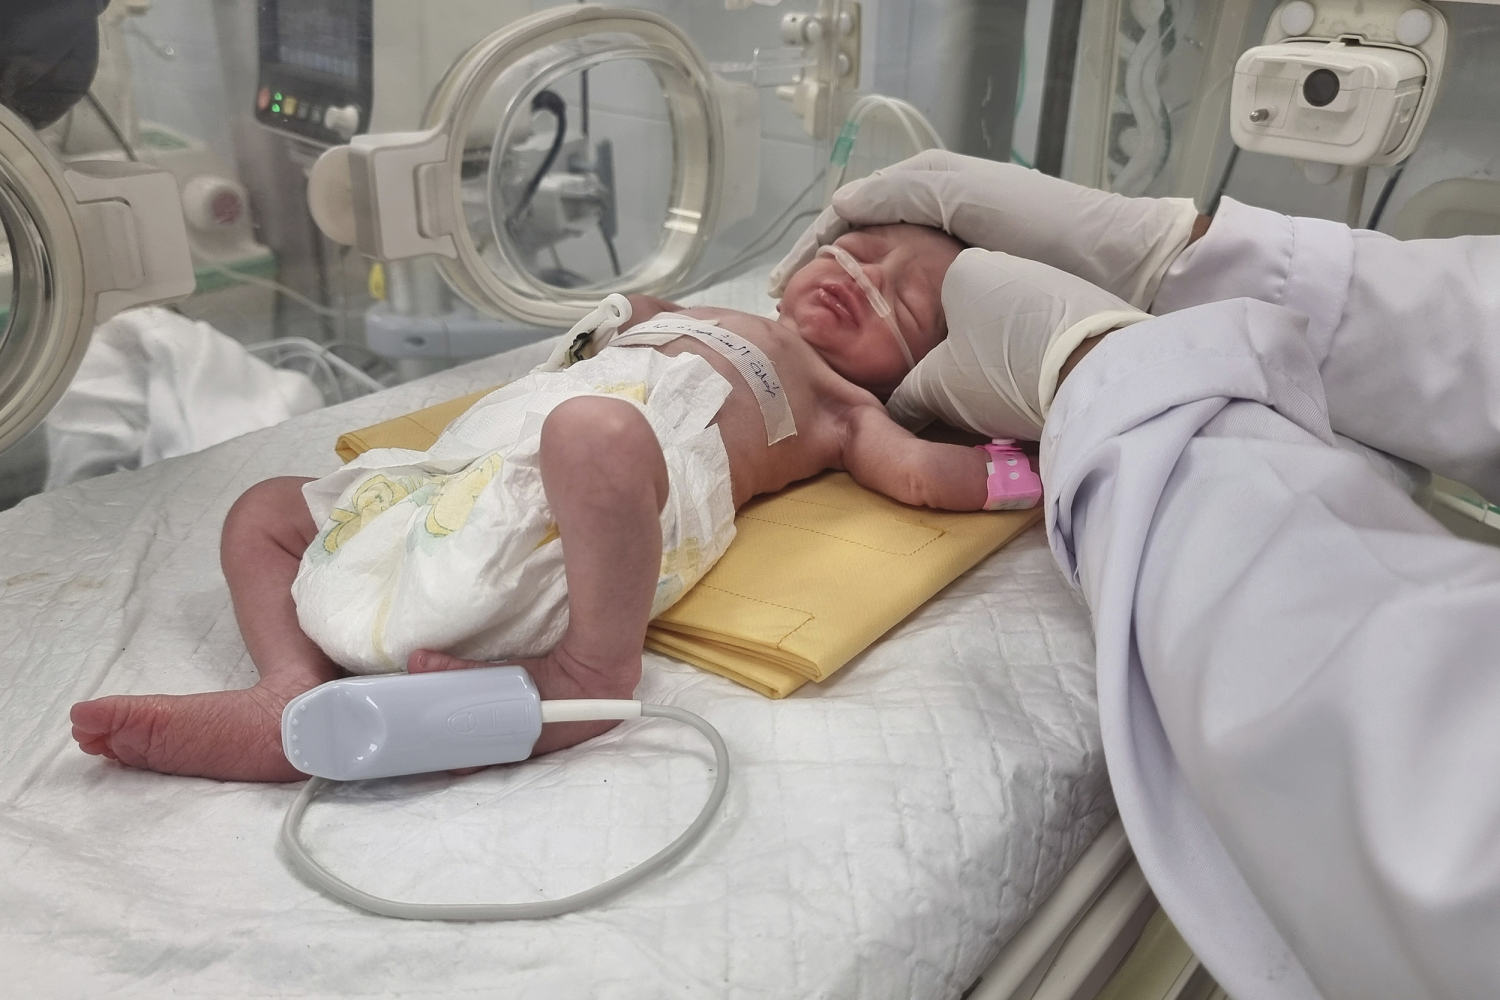 Orphaned by an airstrike and saved from her dead mother’s womb, baby Sabreen has died